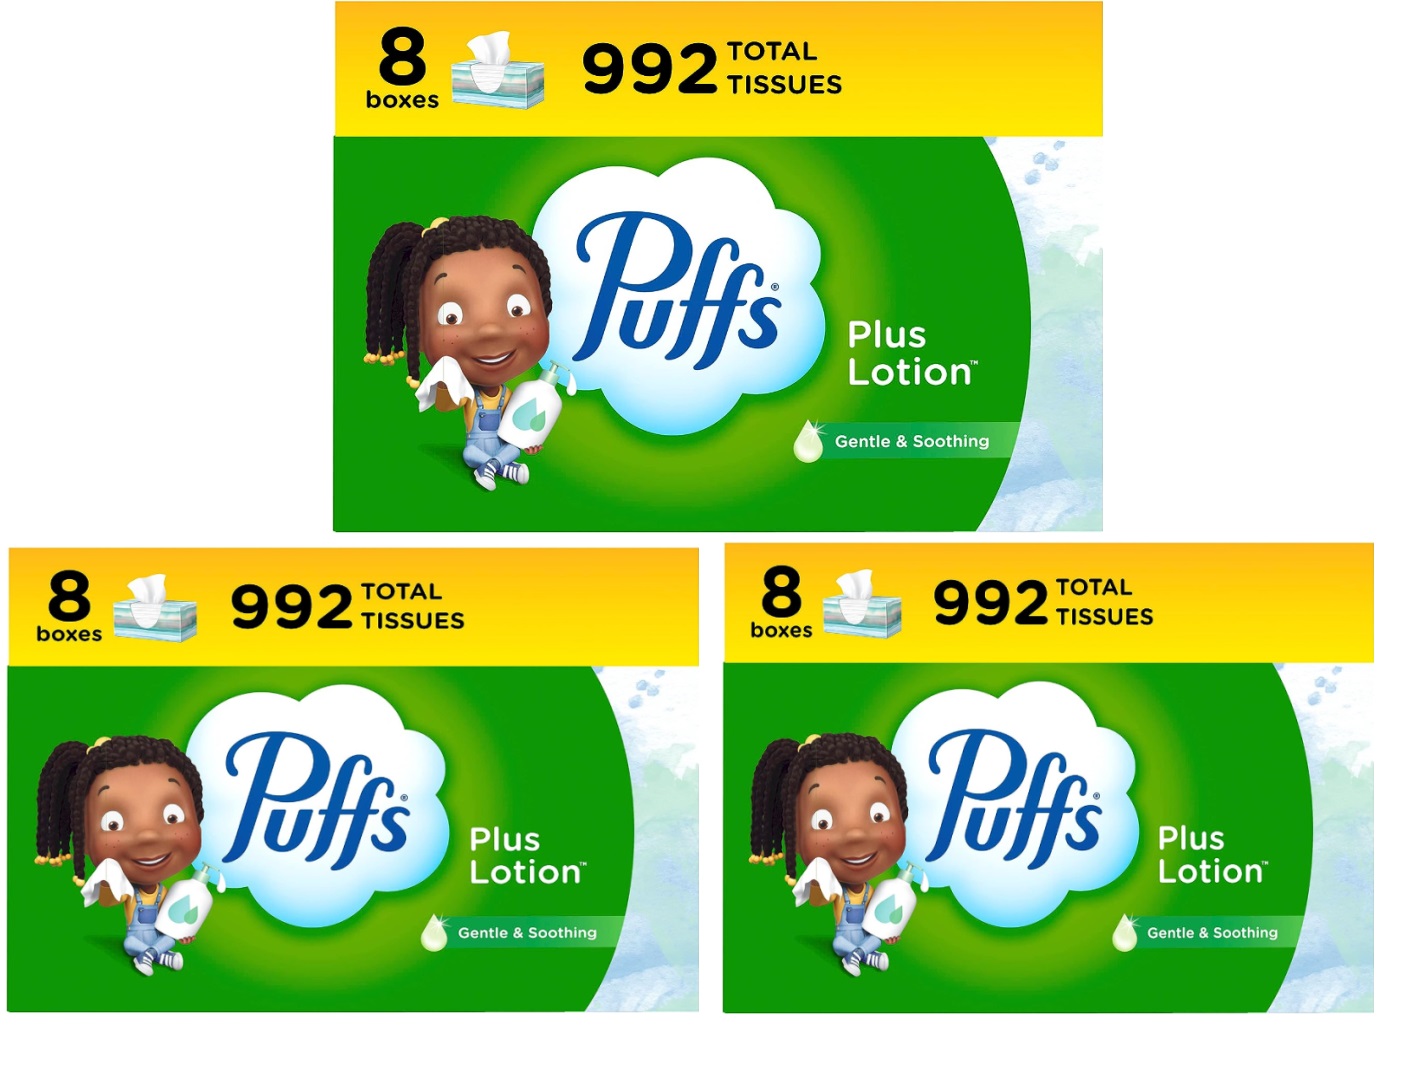 Puffs Plus Lotion Facial Tissues, 72 count